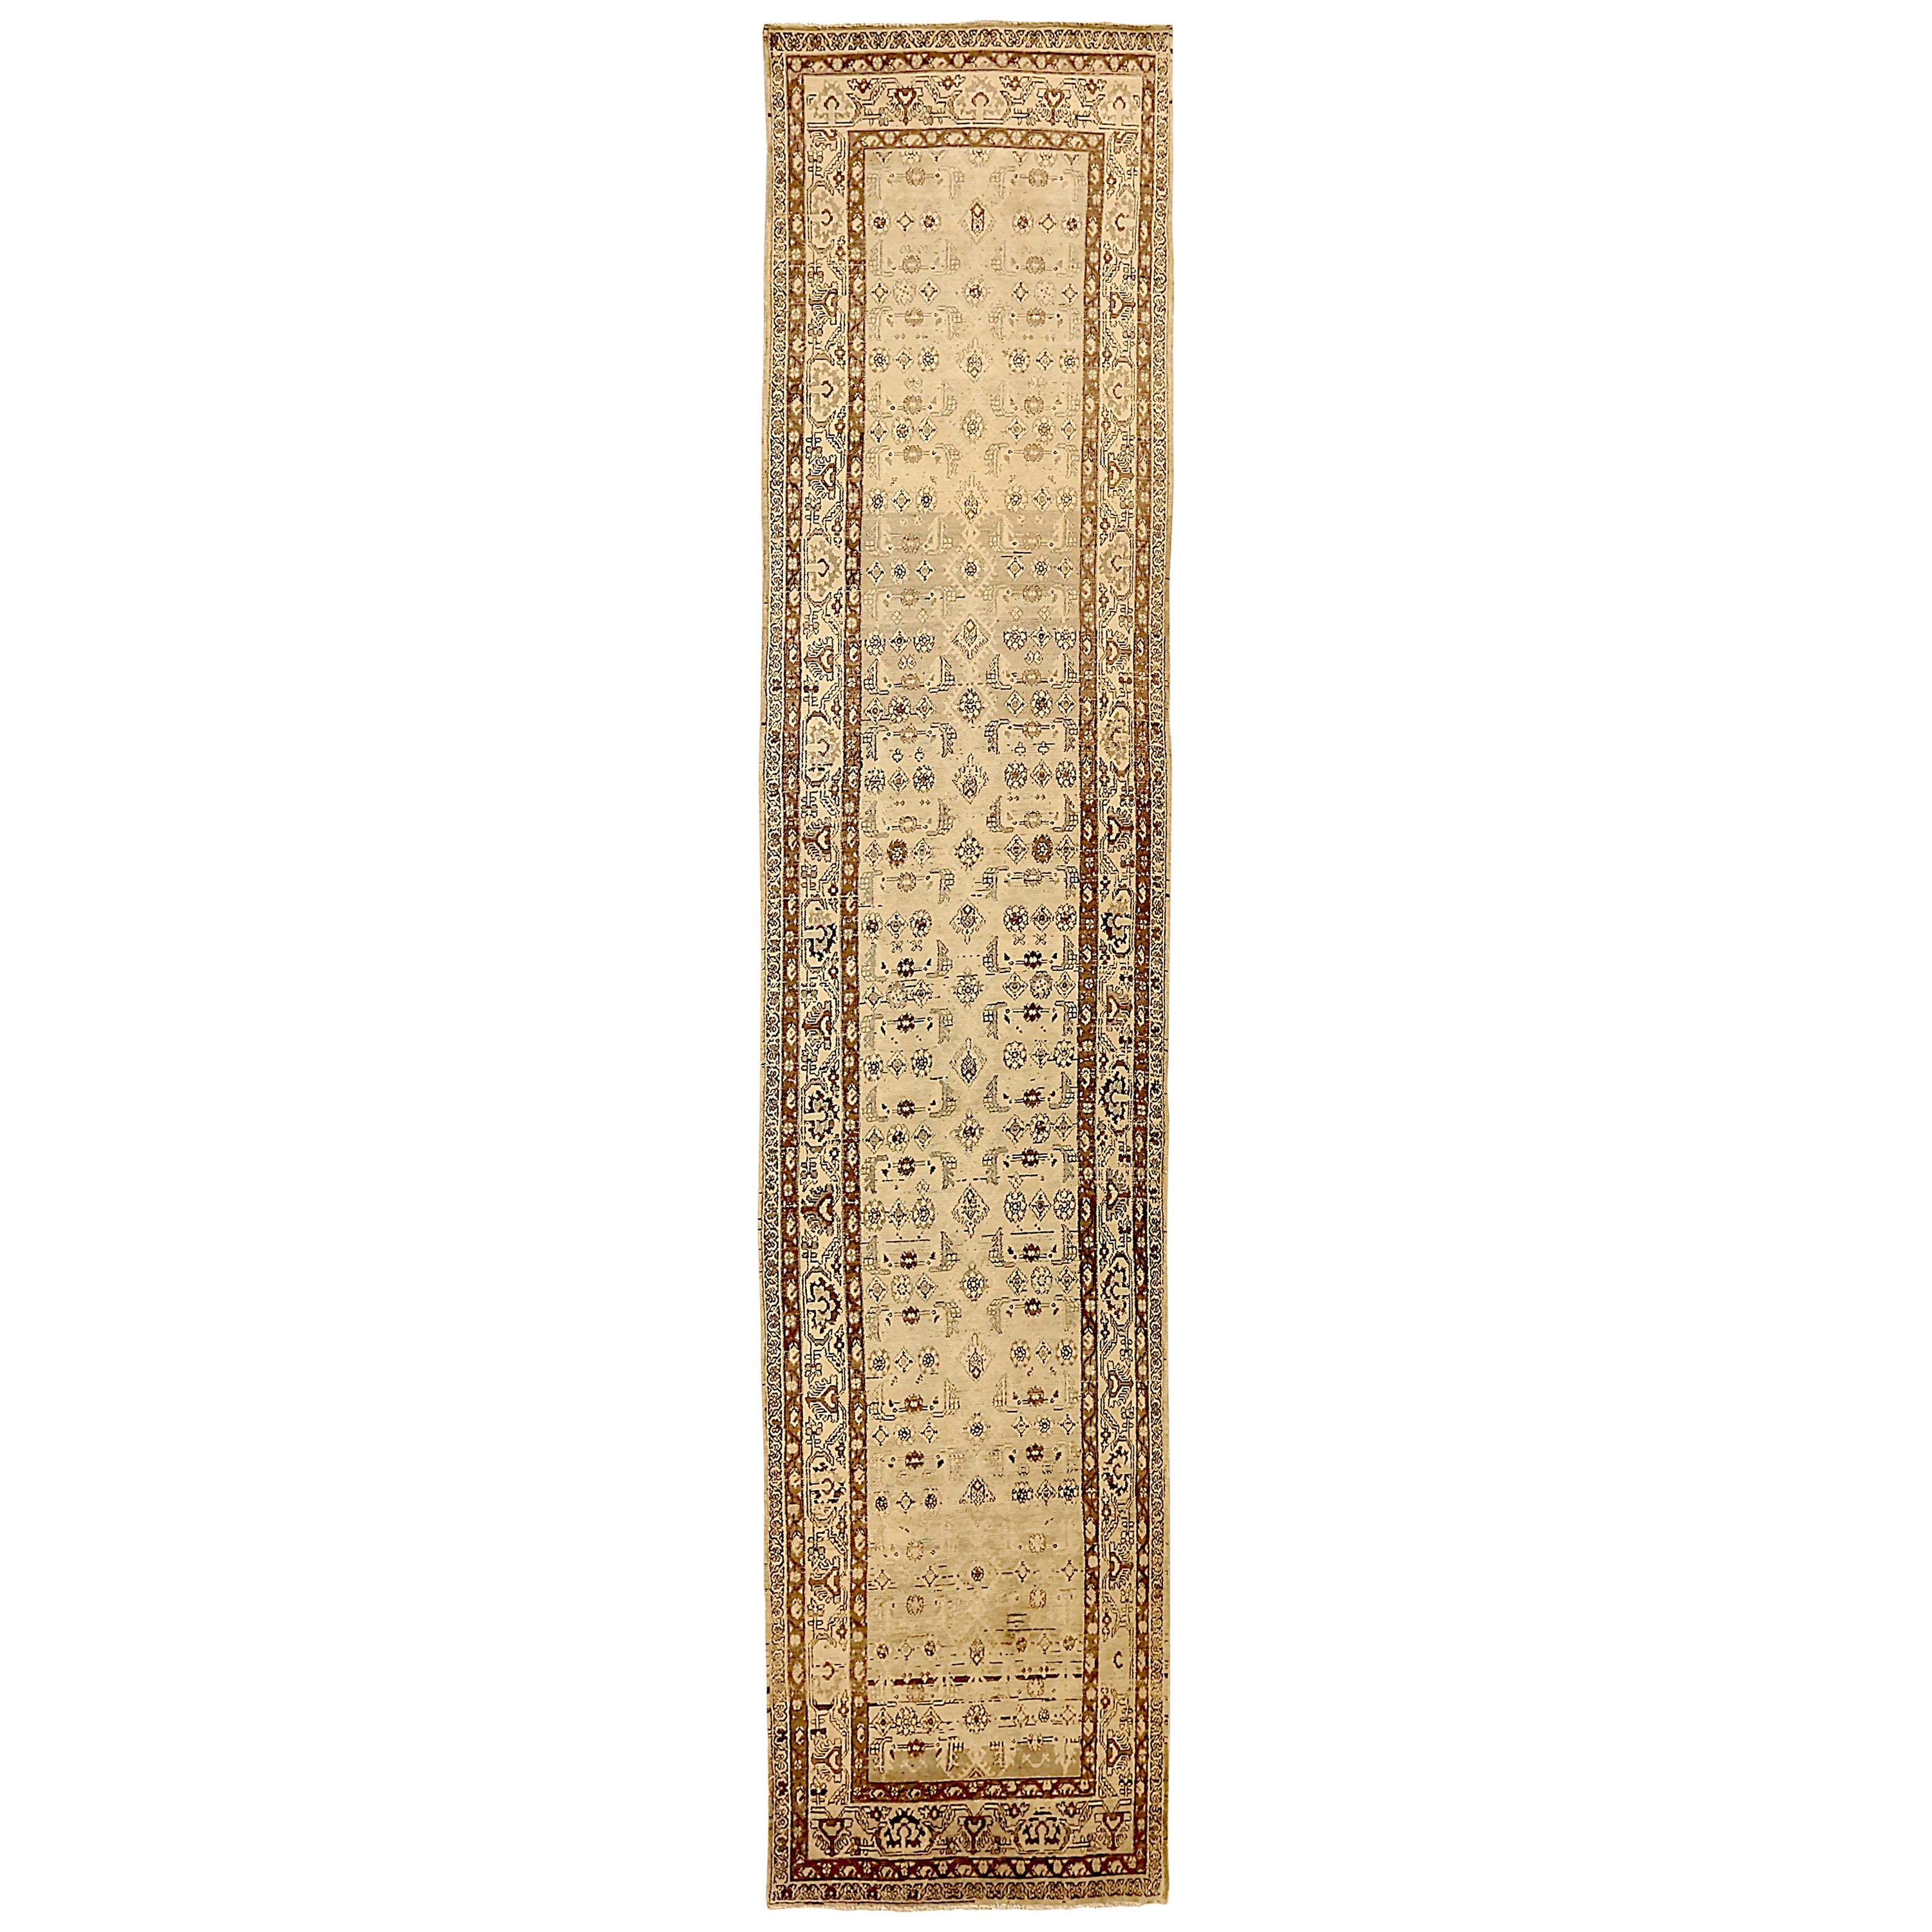 Antique Persian Malayer Runner Rug with Tribal Design in Ivory Field